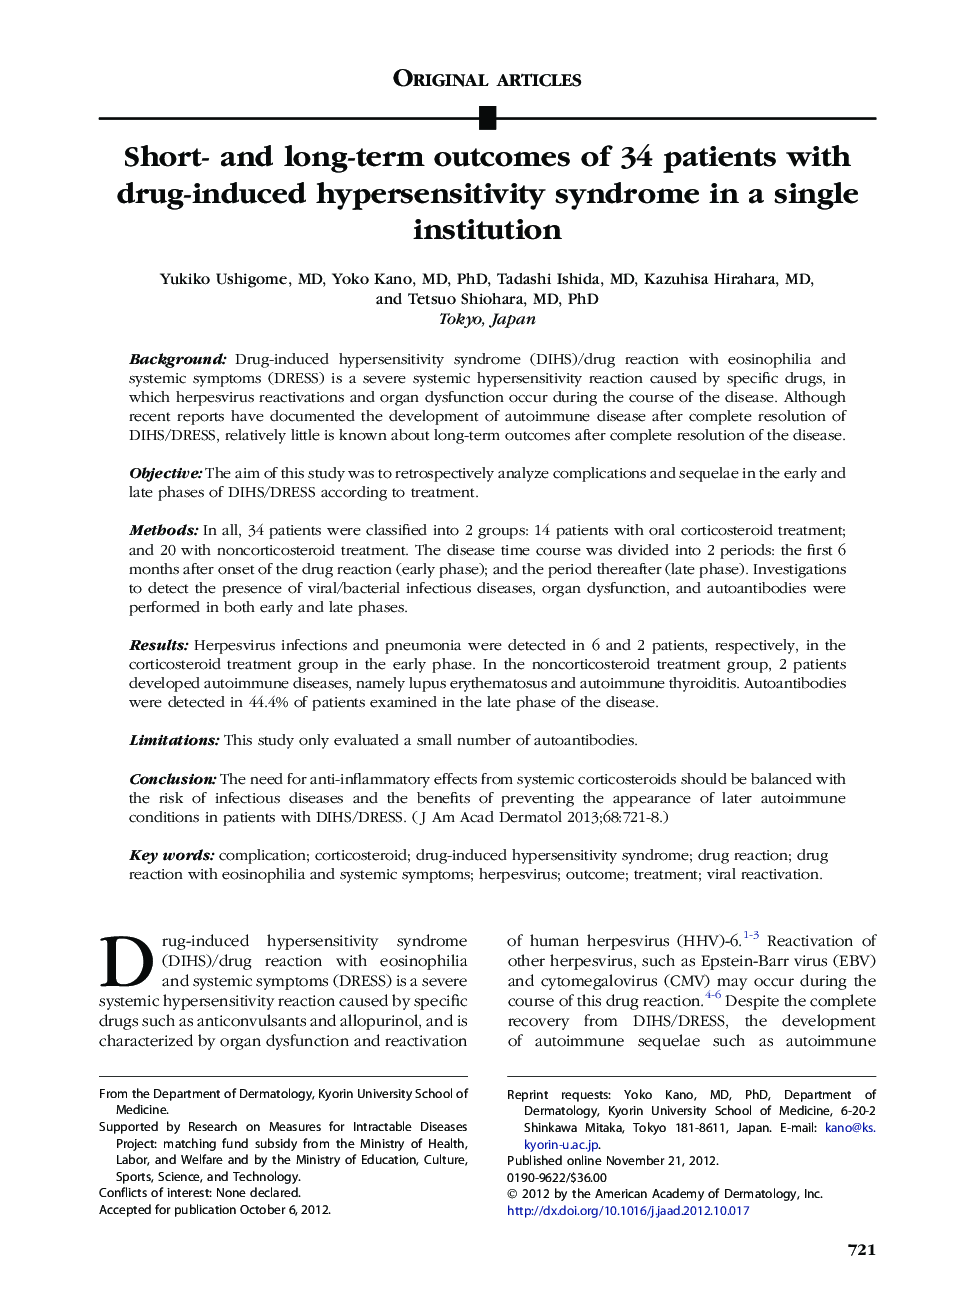 Short- and long-term outcomes of 34 patients with drug-induced hypersensitivity syndrome in a single institution